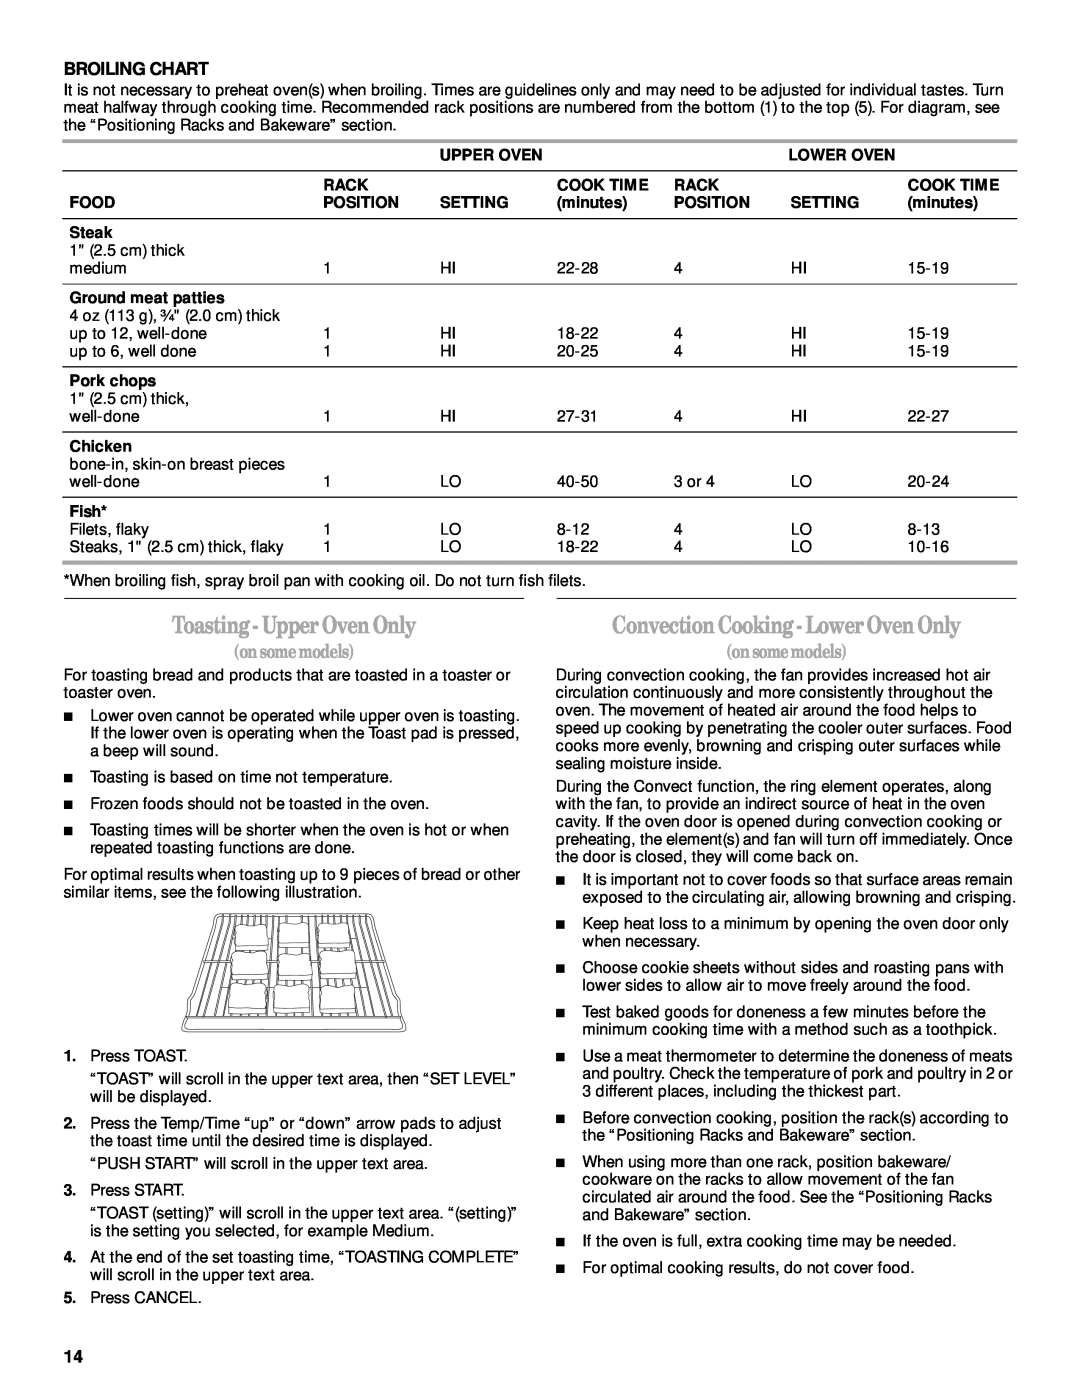 Whirlpool GGE388LX, GGE390LX manual Toasting-UpperOvenOnly, ConvectionCooking-LowerOvenOnly, onsomemodels, Broiling Chart 